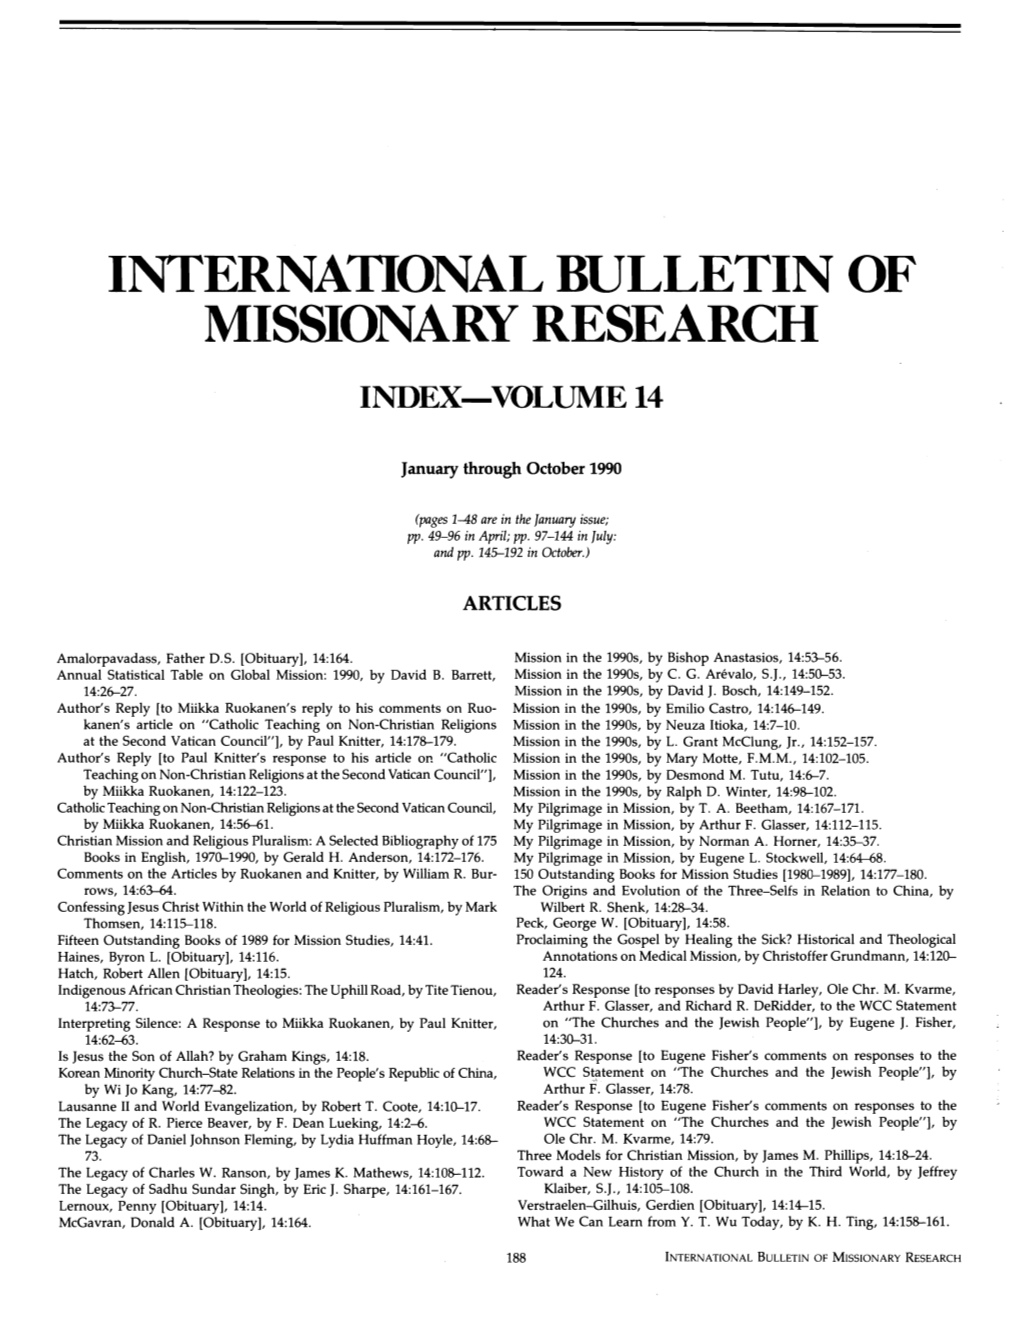 International Bulletin of Missionary Research Index-Volume 14